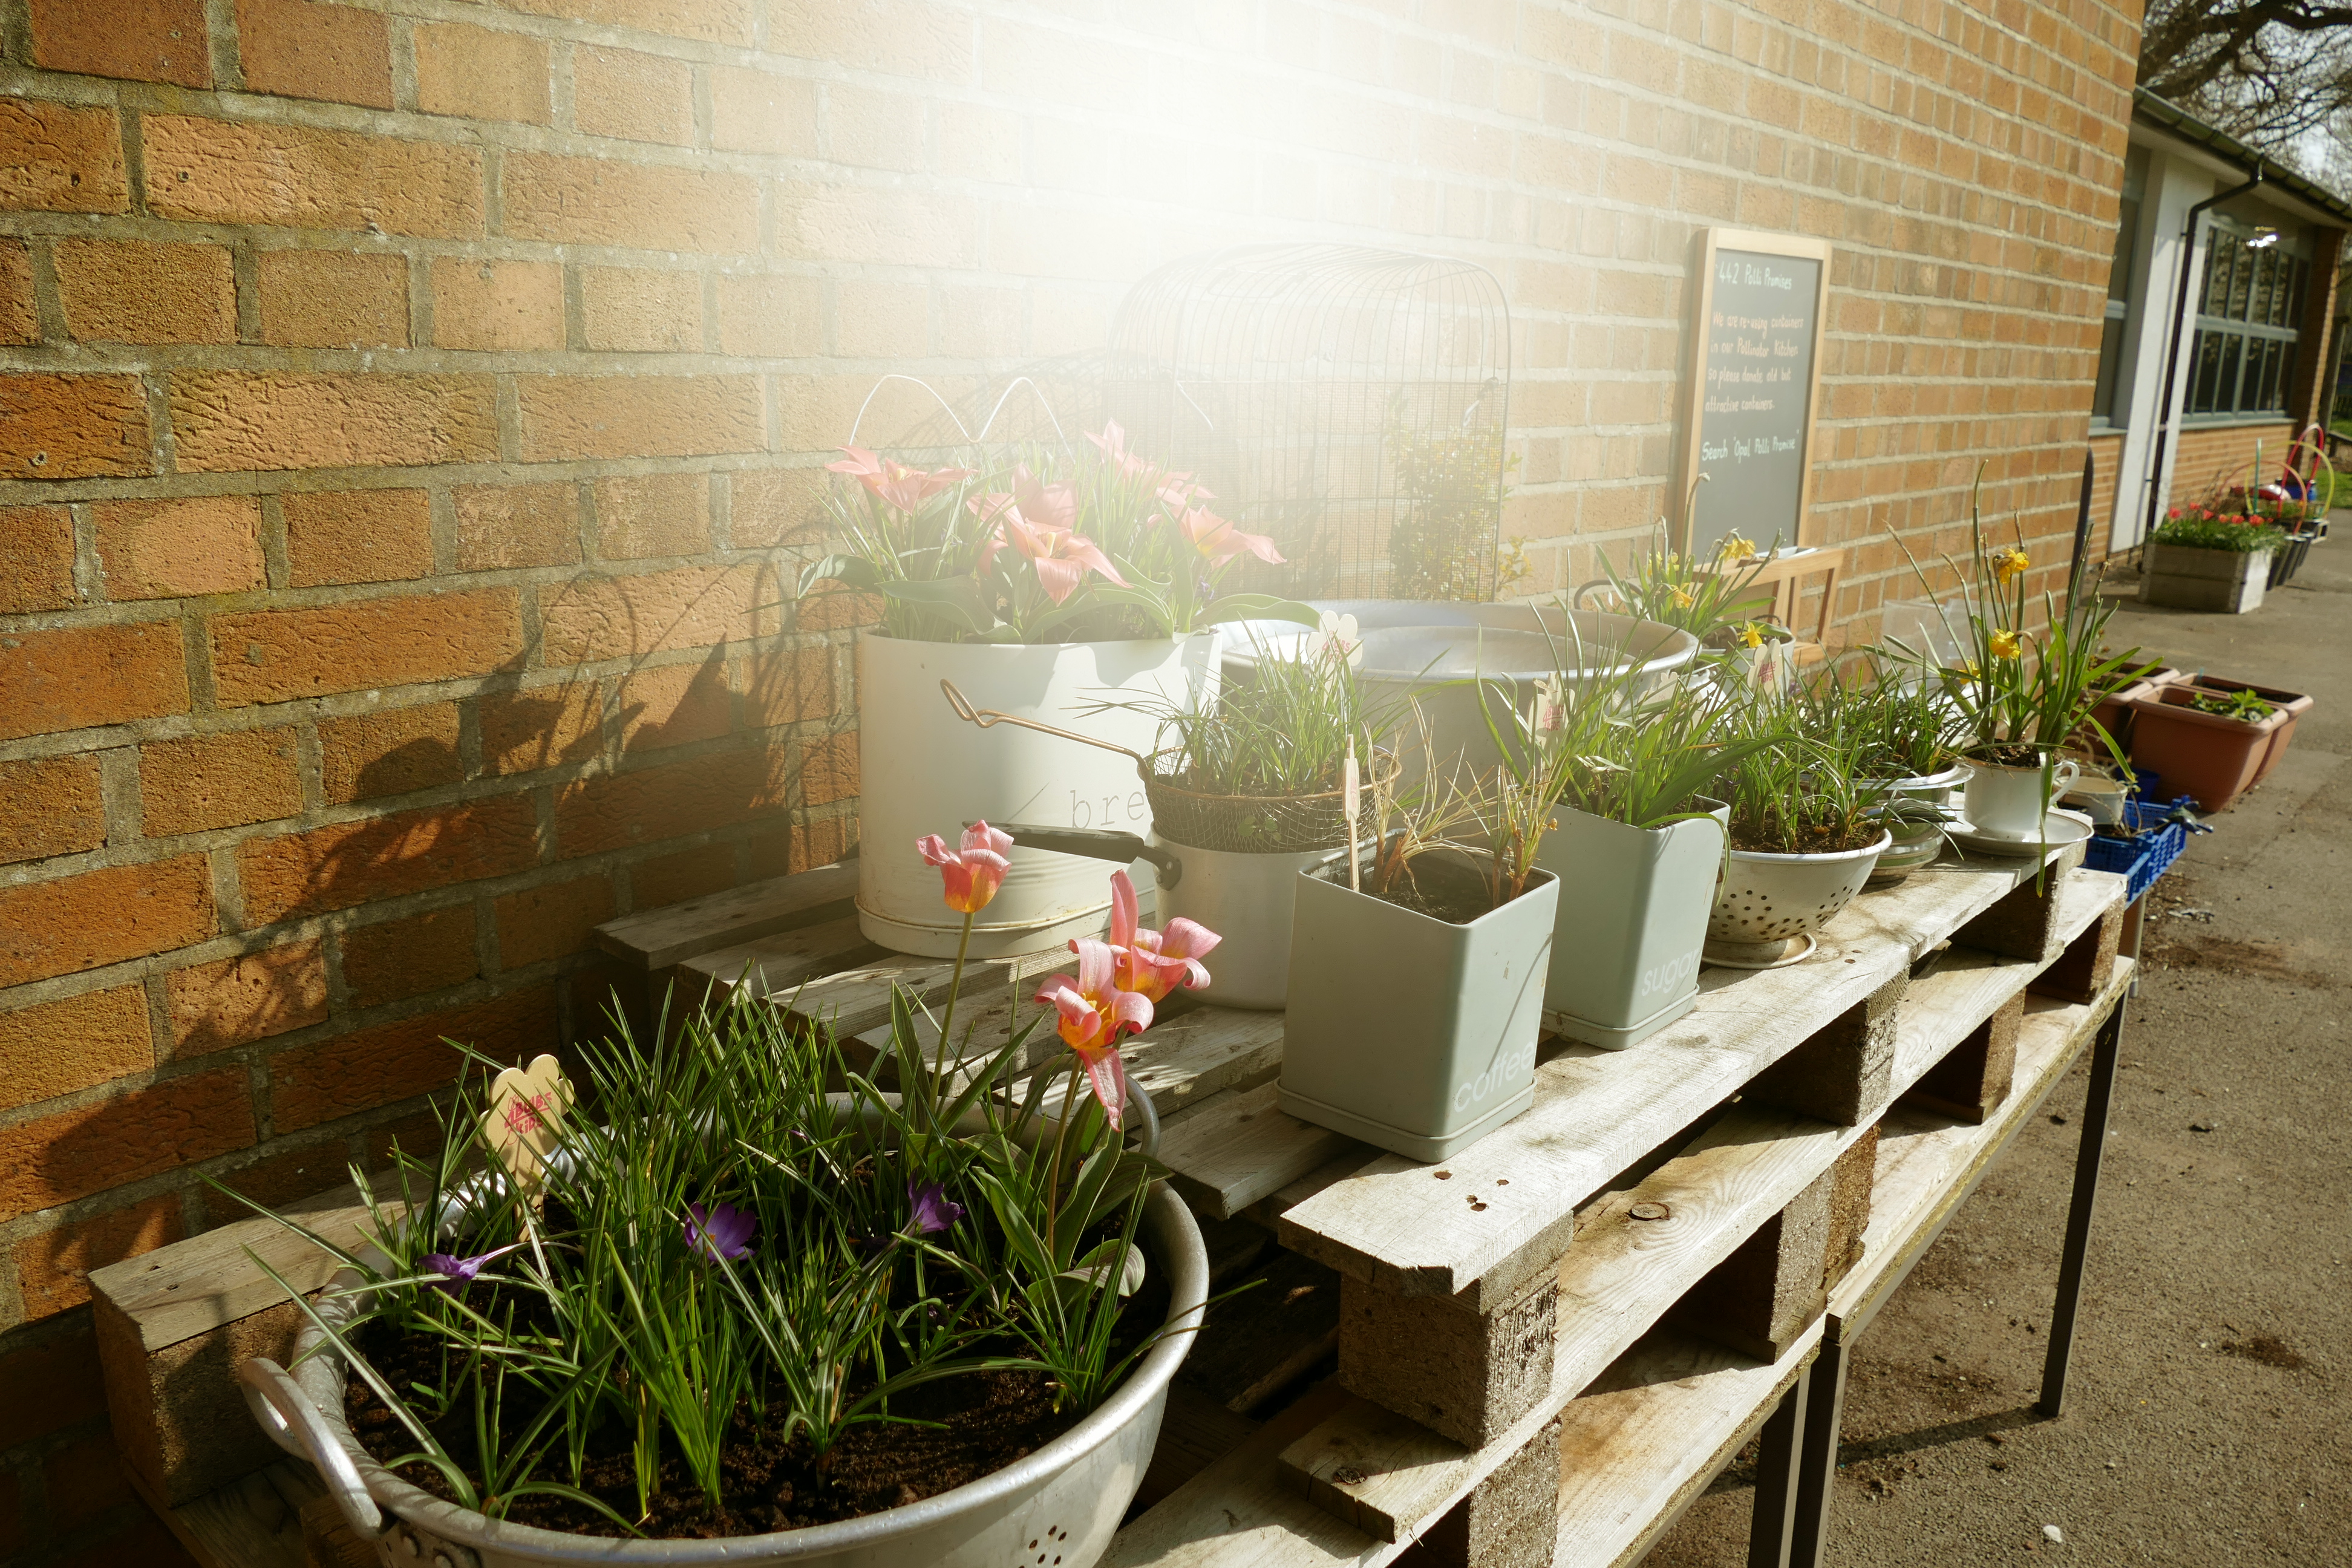 Planting Boxes in a School Yard